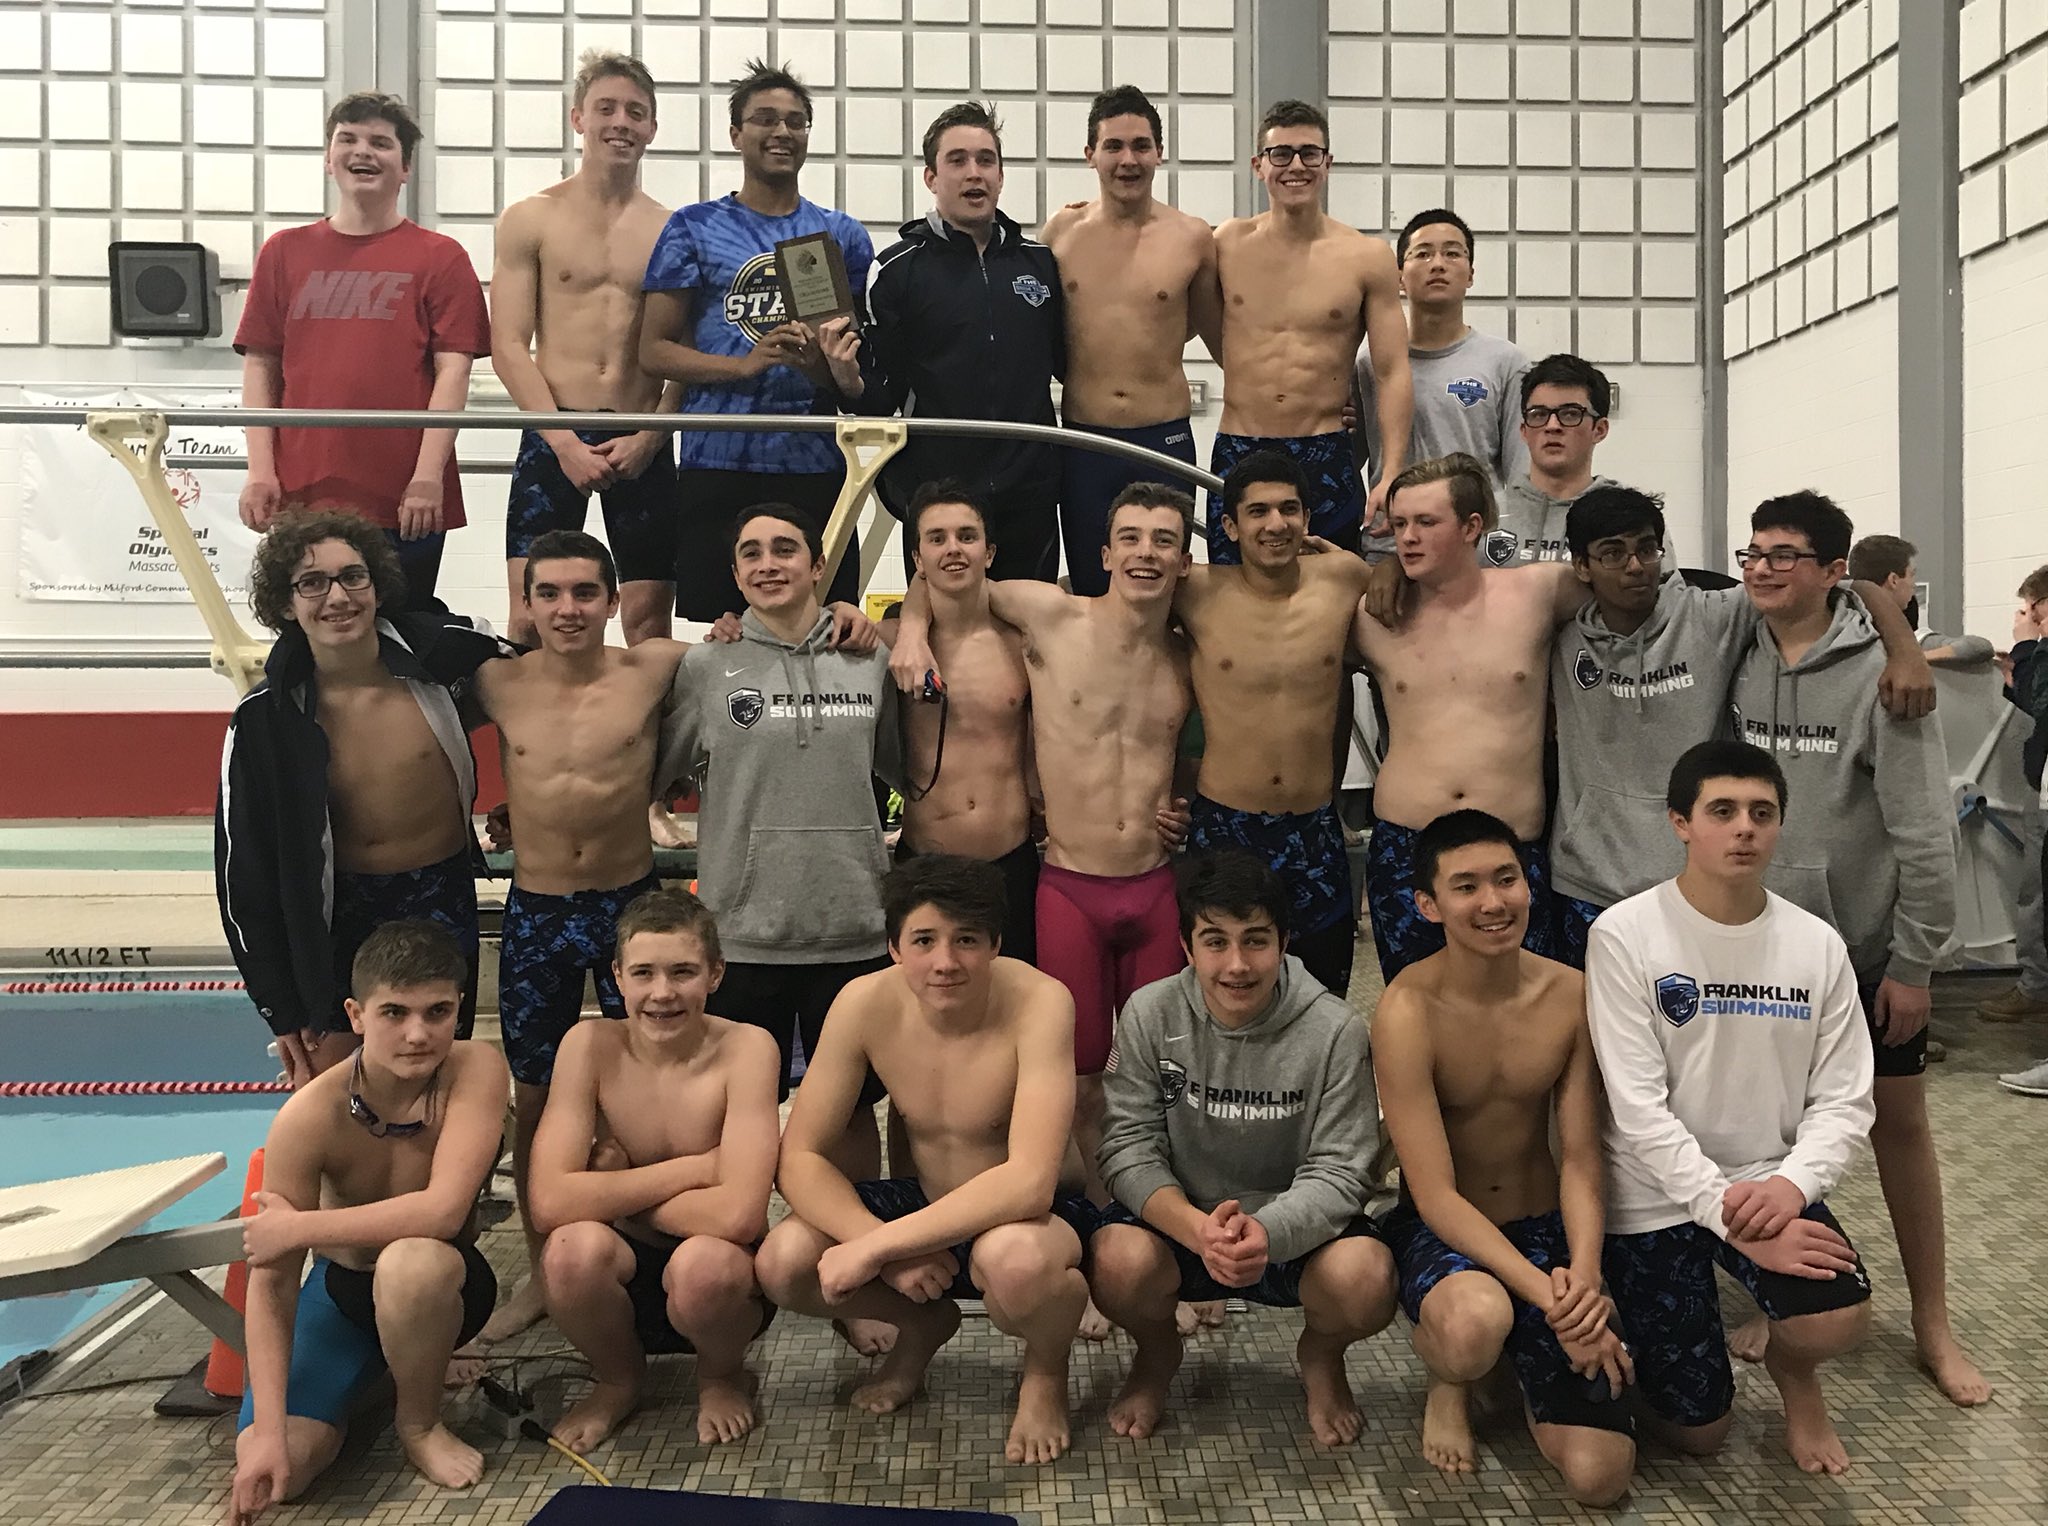 FHS Boys swim team takes Hockomock Championship in a true team way,  only 1 individual 1st place finish but lots of depth